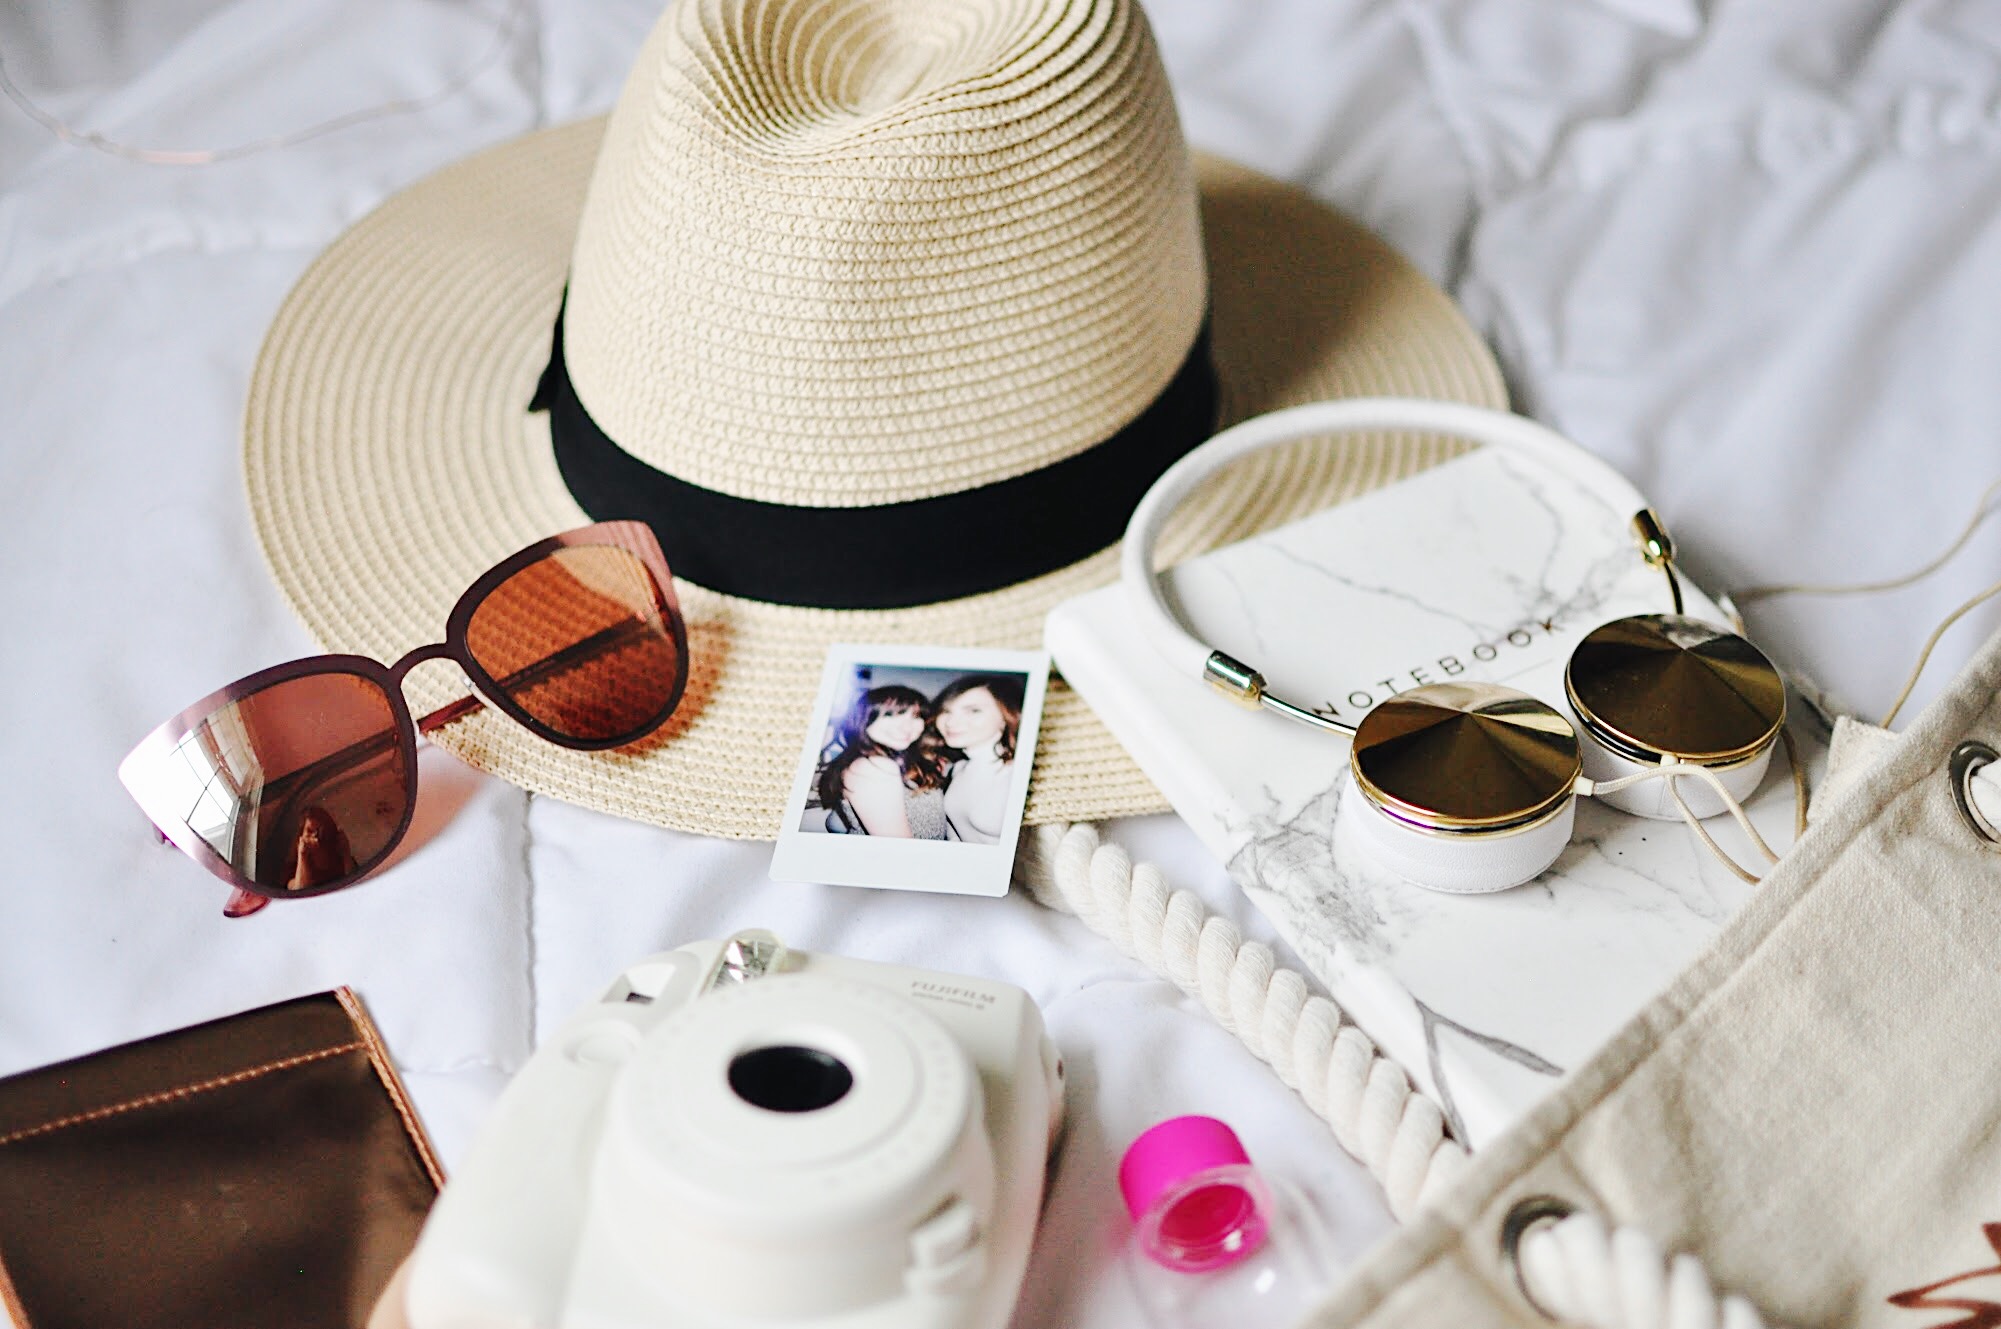 5 Spring Break Essentials to Throw in Your Carry-On